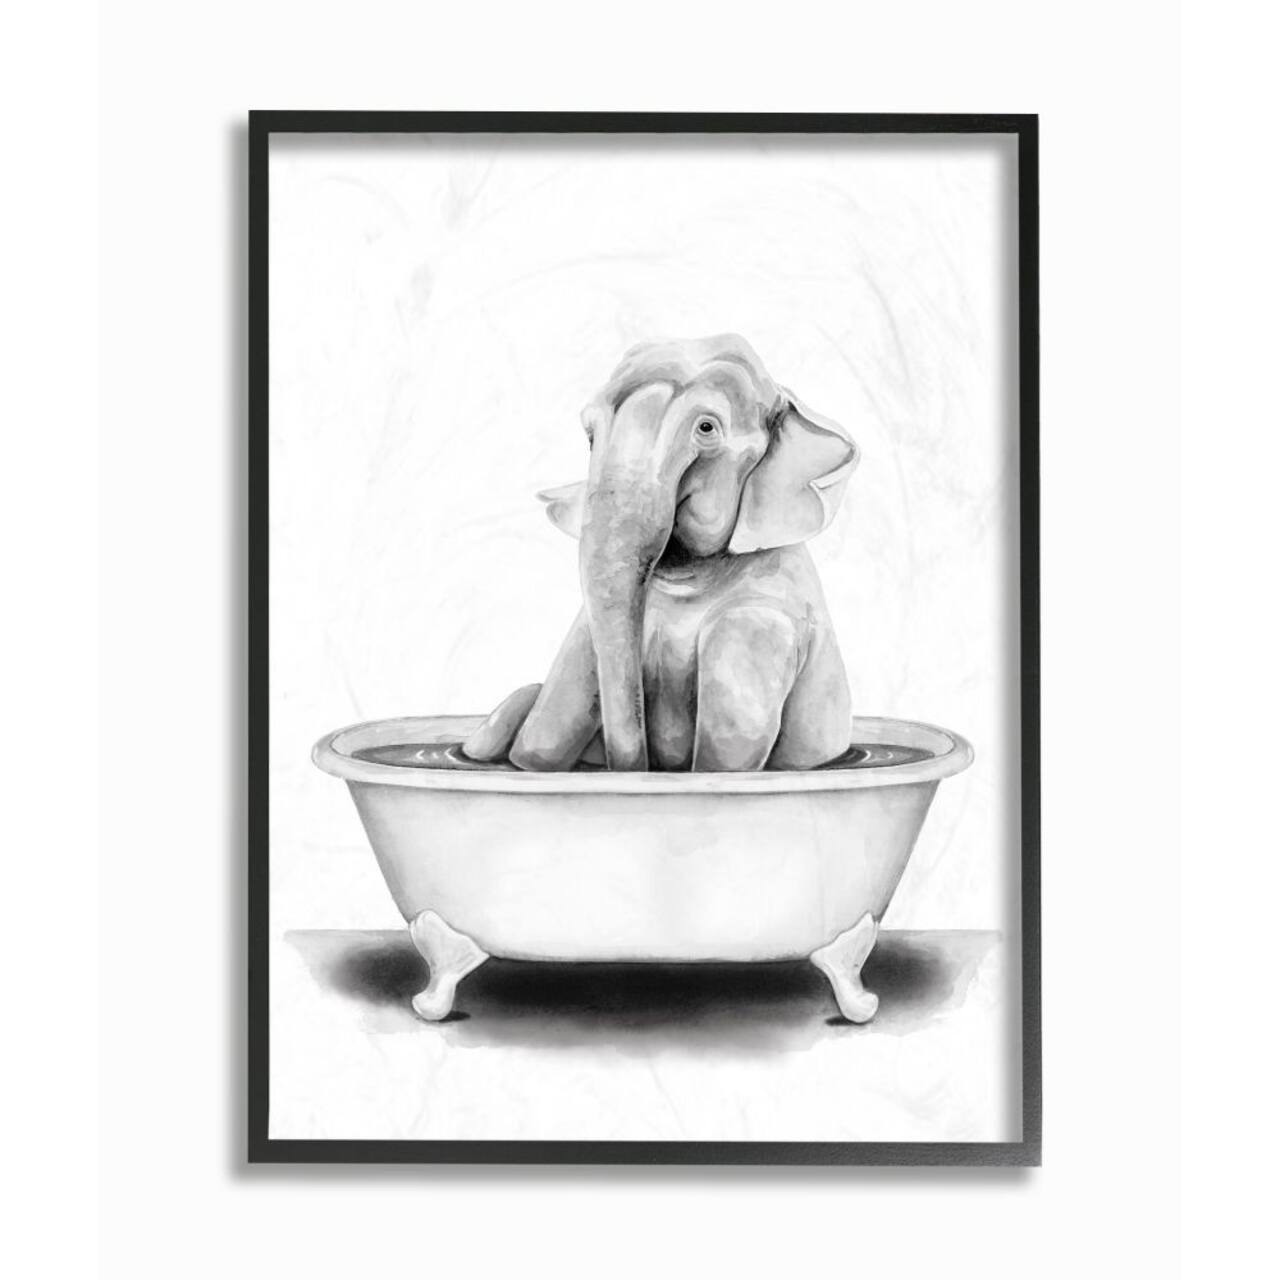 Stupell Industries Elephant In A Tub Wall Art in Black Frame